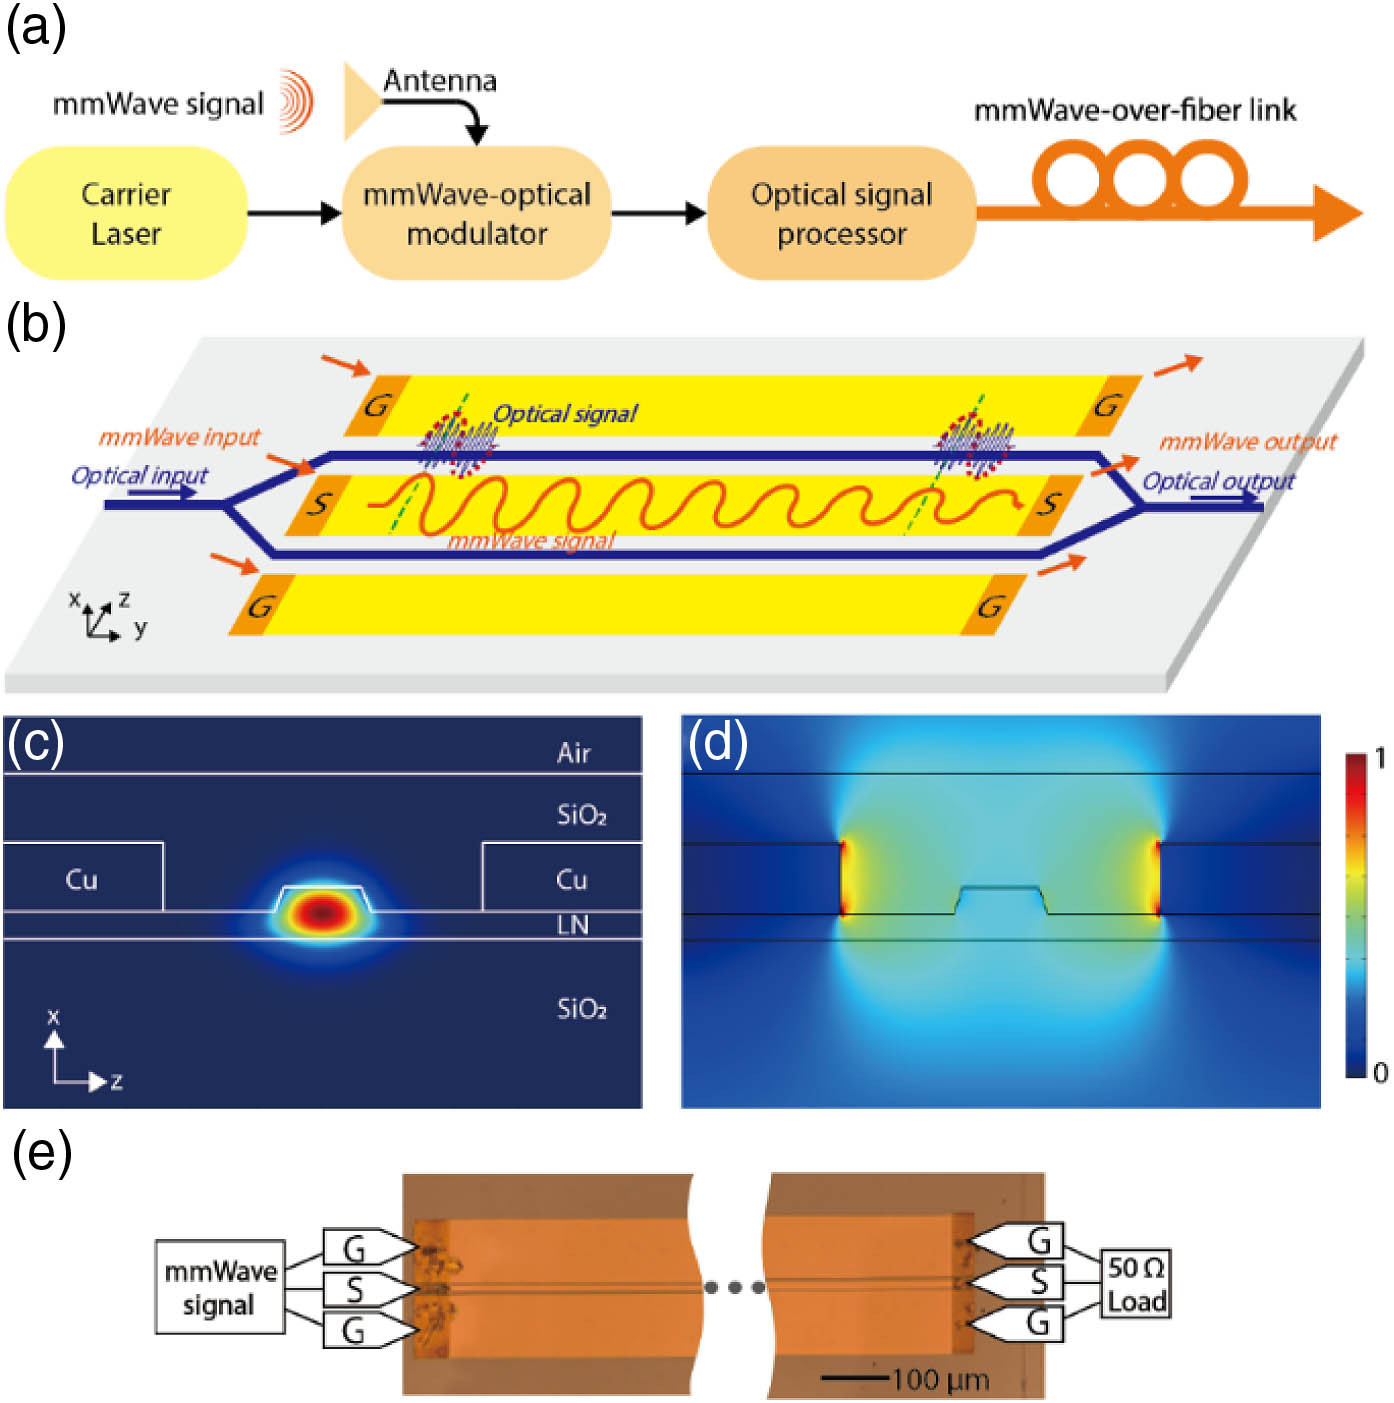 (a) The schematic illustration of a future mmWave-photonic system, at the heart of which sits the mmWave-optic modulator that converts mmWave signals into the optical domain. (b) The schematic of the TFLN mmWave-optic modulator, where velocity matching between the optical and mmWave signals, impedance matching, and RF loss conditions determine the ultimately achievable modulation bandwidths. (c) The simulated optical mode profile (Ez) in the TFLN rib waveguide. (d) The simulated mmWave profile (Ez) at a frequency of 300 GHz. (e) The optical micrograph of a fabricated device (the darker regions at the two ends are exposed areas for electrical contacts, whereas other parts of the chip are cladded with silicon dioxide).